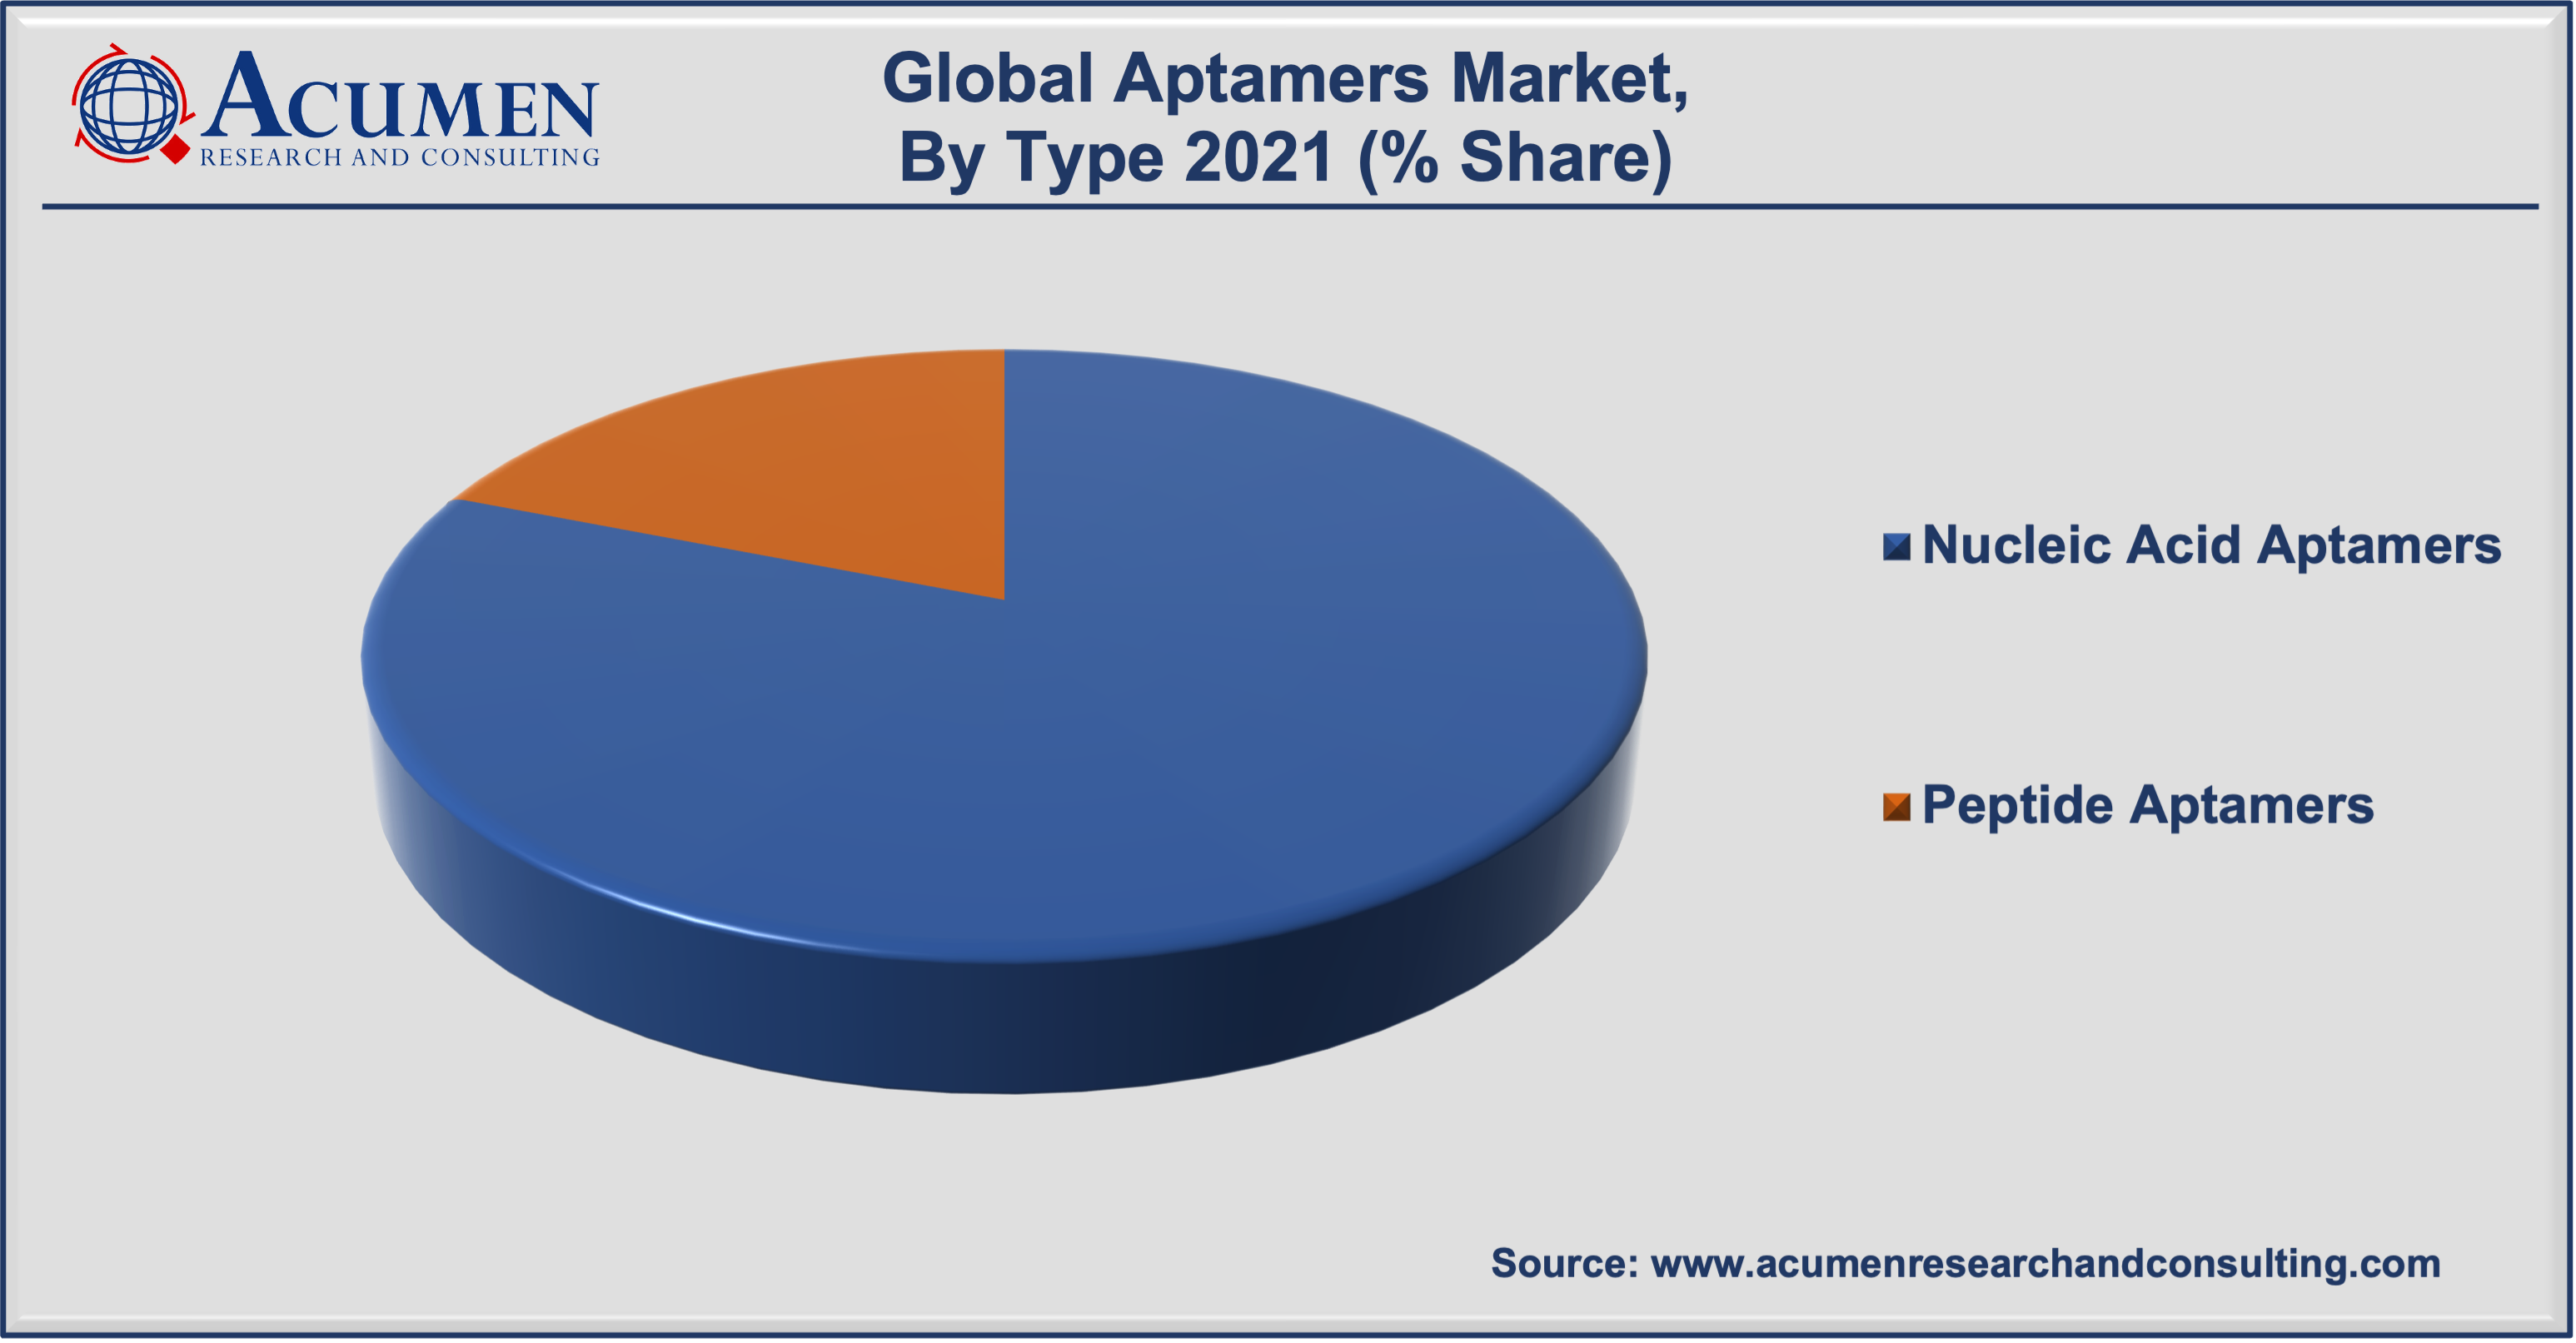 Aptamers Market Share accounted for USD 1,229 Million in 2021 and is expected to reach the value of USD 5,957 Million by 2030 at a CAGR of 19.6% during the forecast period from 2022 to 2030.